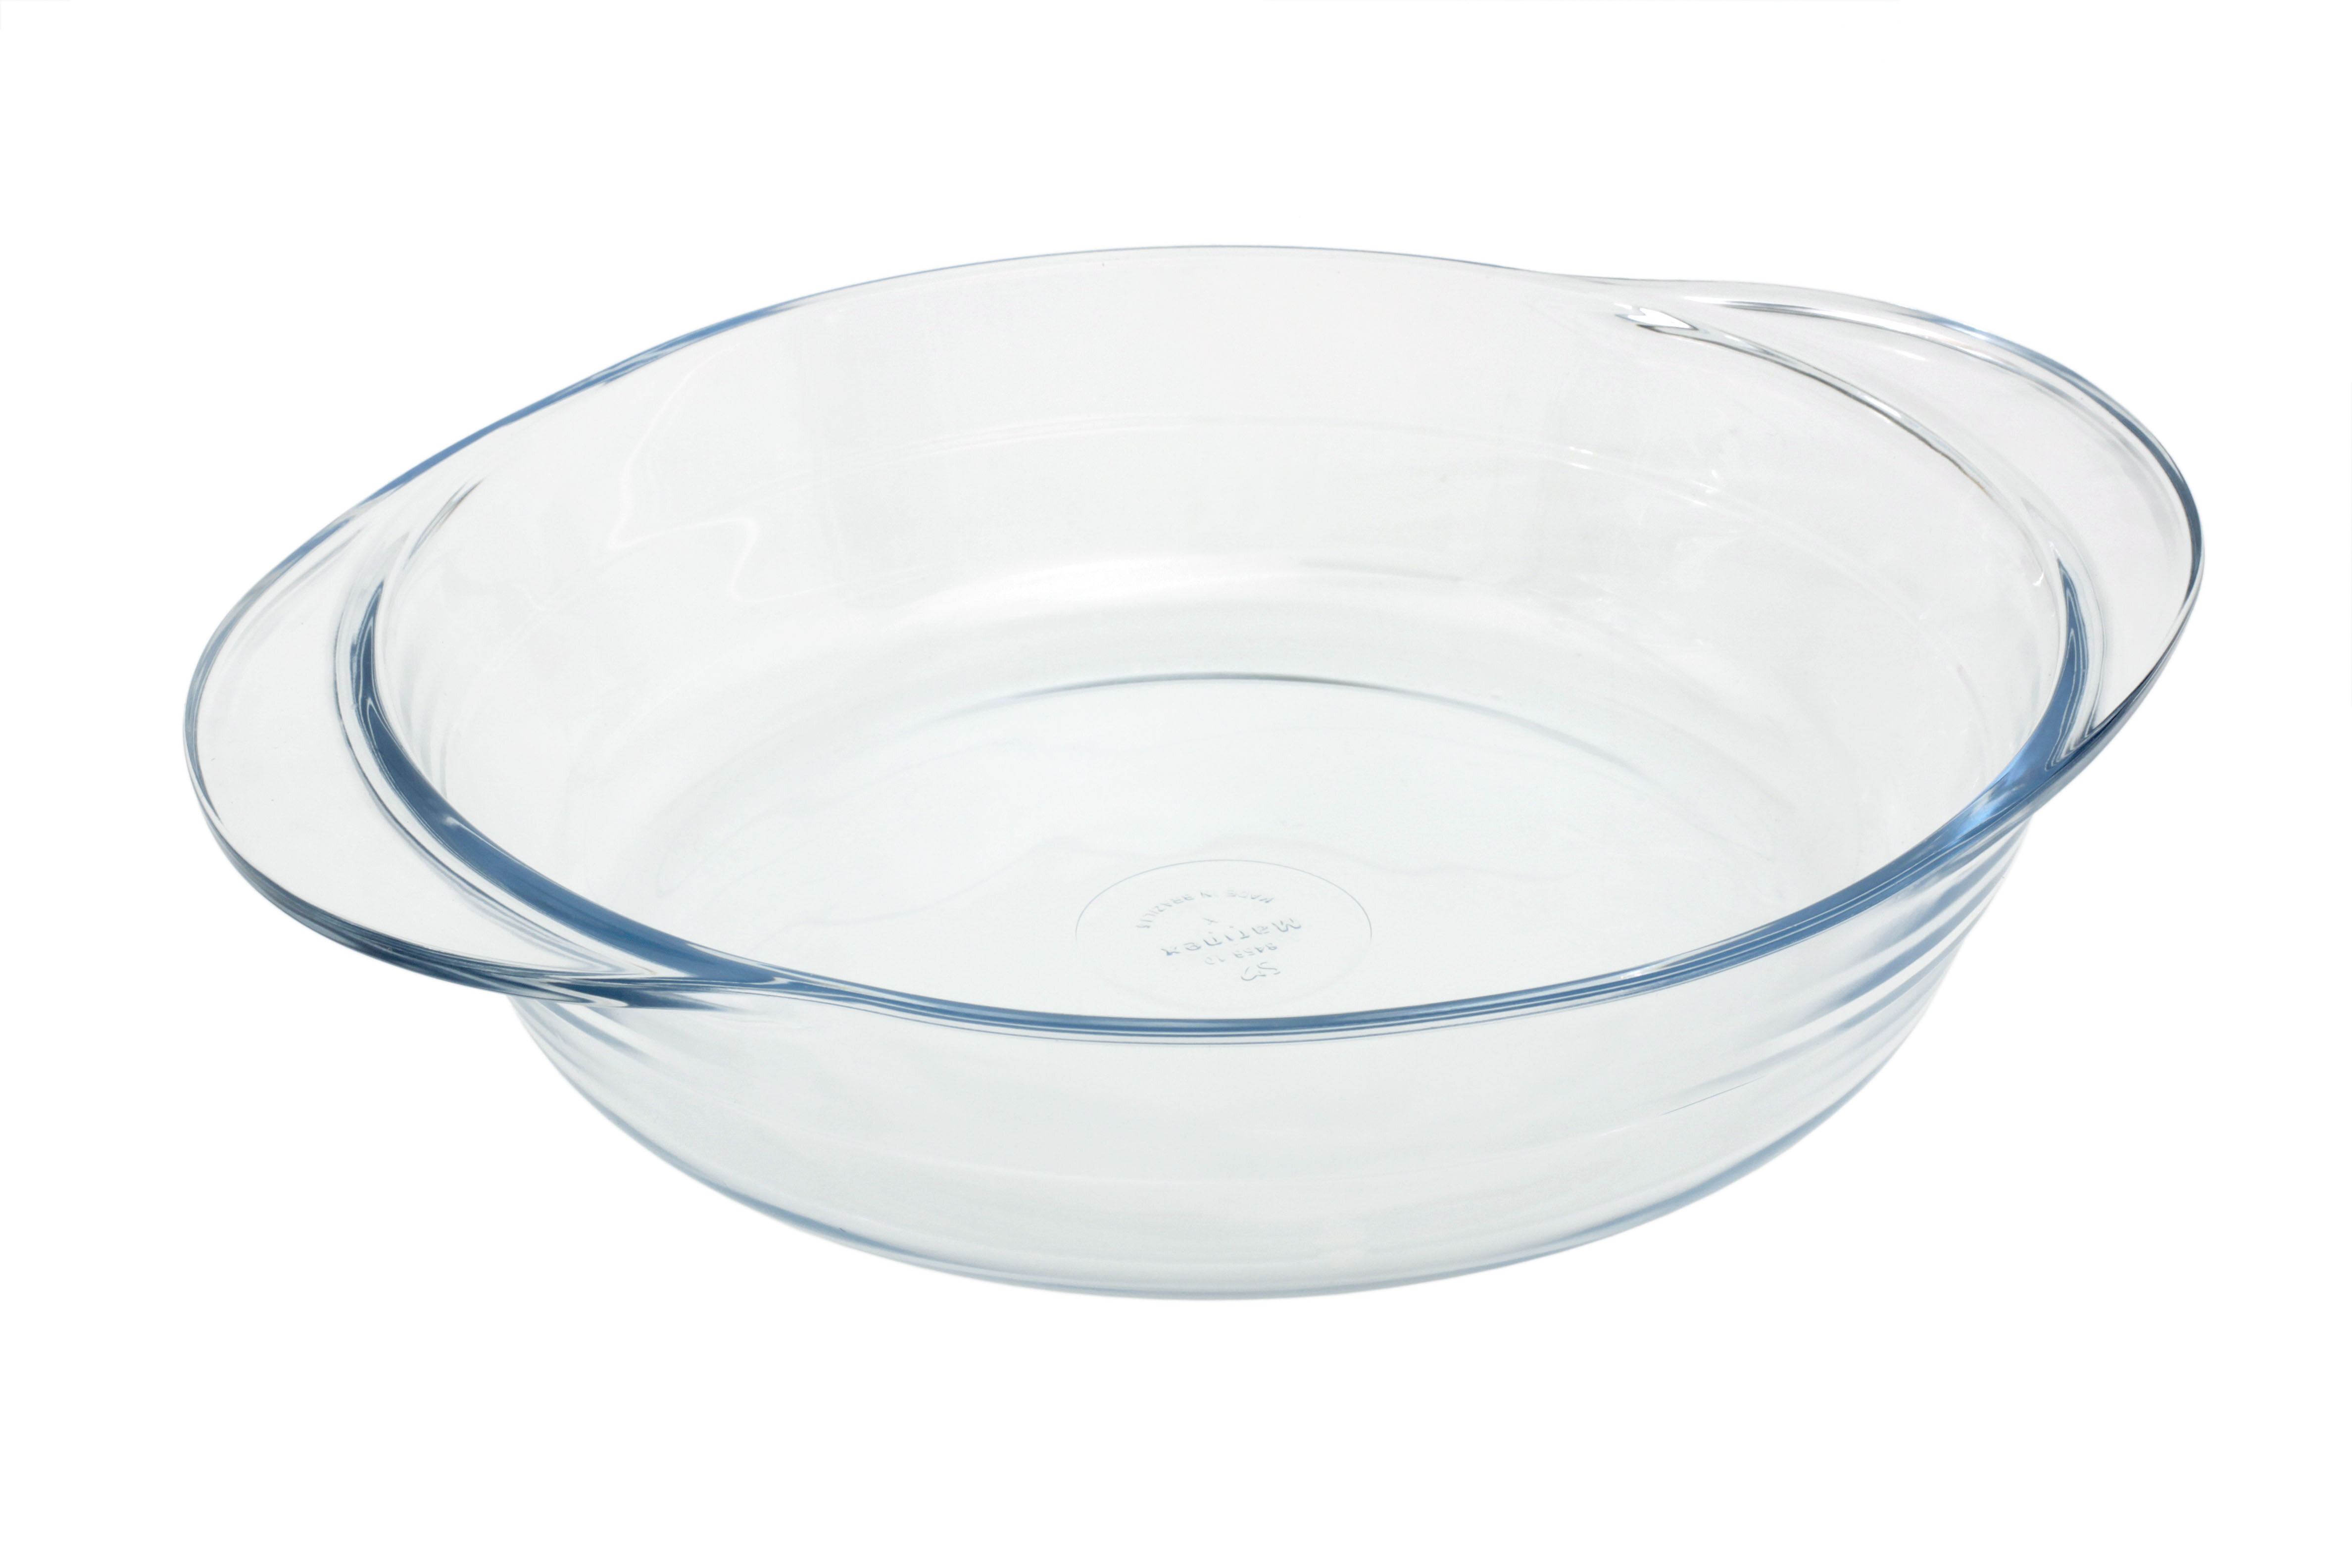 Clear Euro-Ware MarinexCelebrity Collection 5 Piece Glass Oval Baking/Serving Dish Set